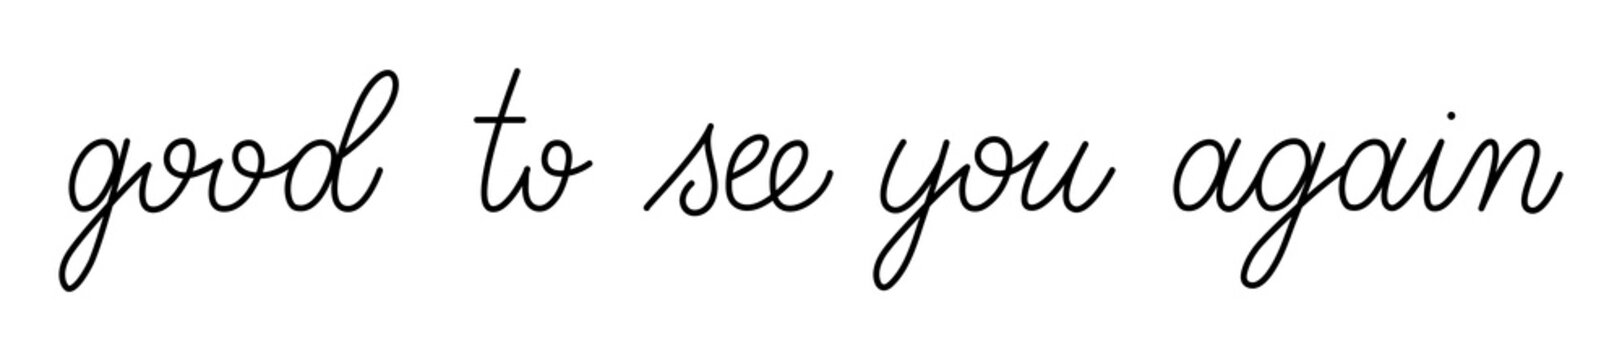 Good to see you again phrase. Handwritten vector lettering illustration. Monoline calligraphy banner. Black inscription isolated on white background.